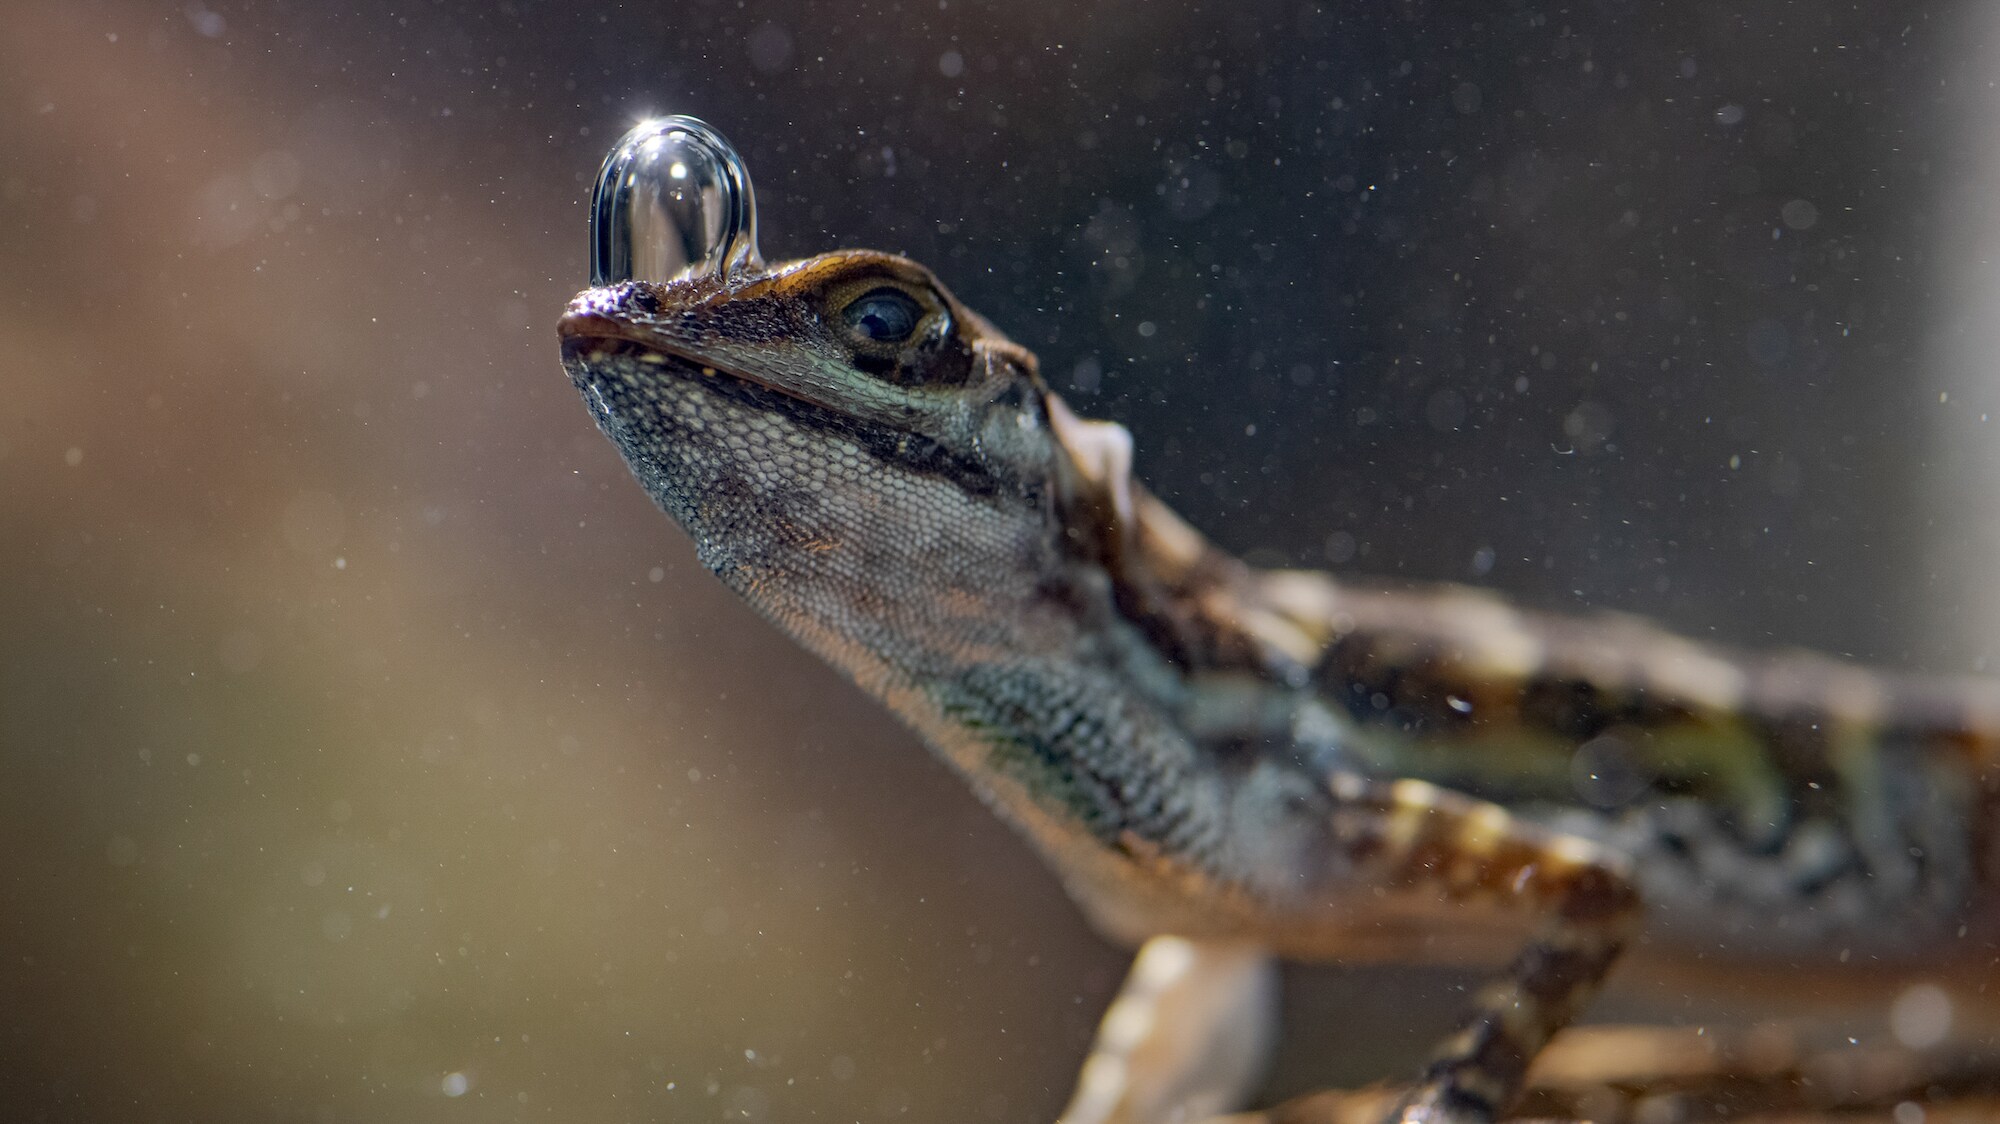 An Anole lizard breathing underwater using it's air bubble in Costa Rica.  (National Geographic for Disney+/Robin Cox)